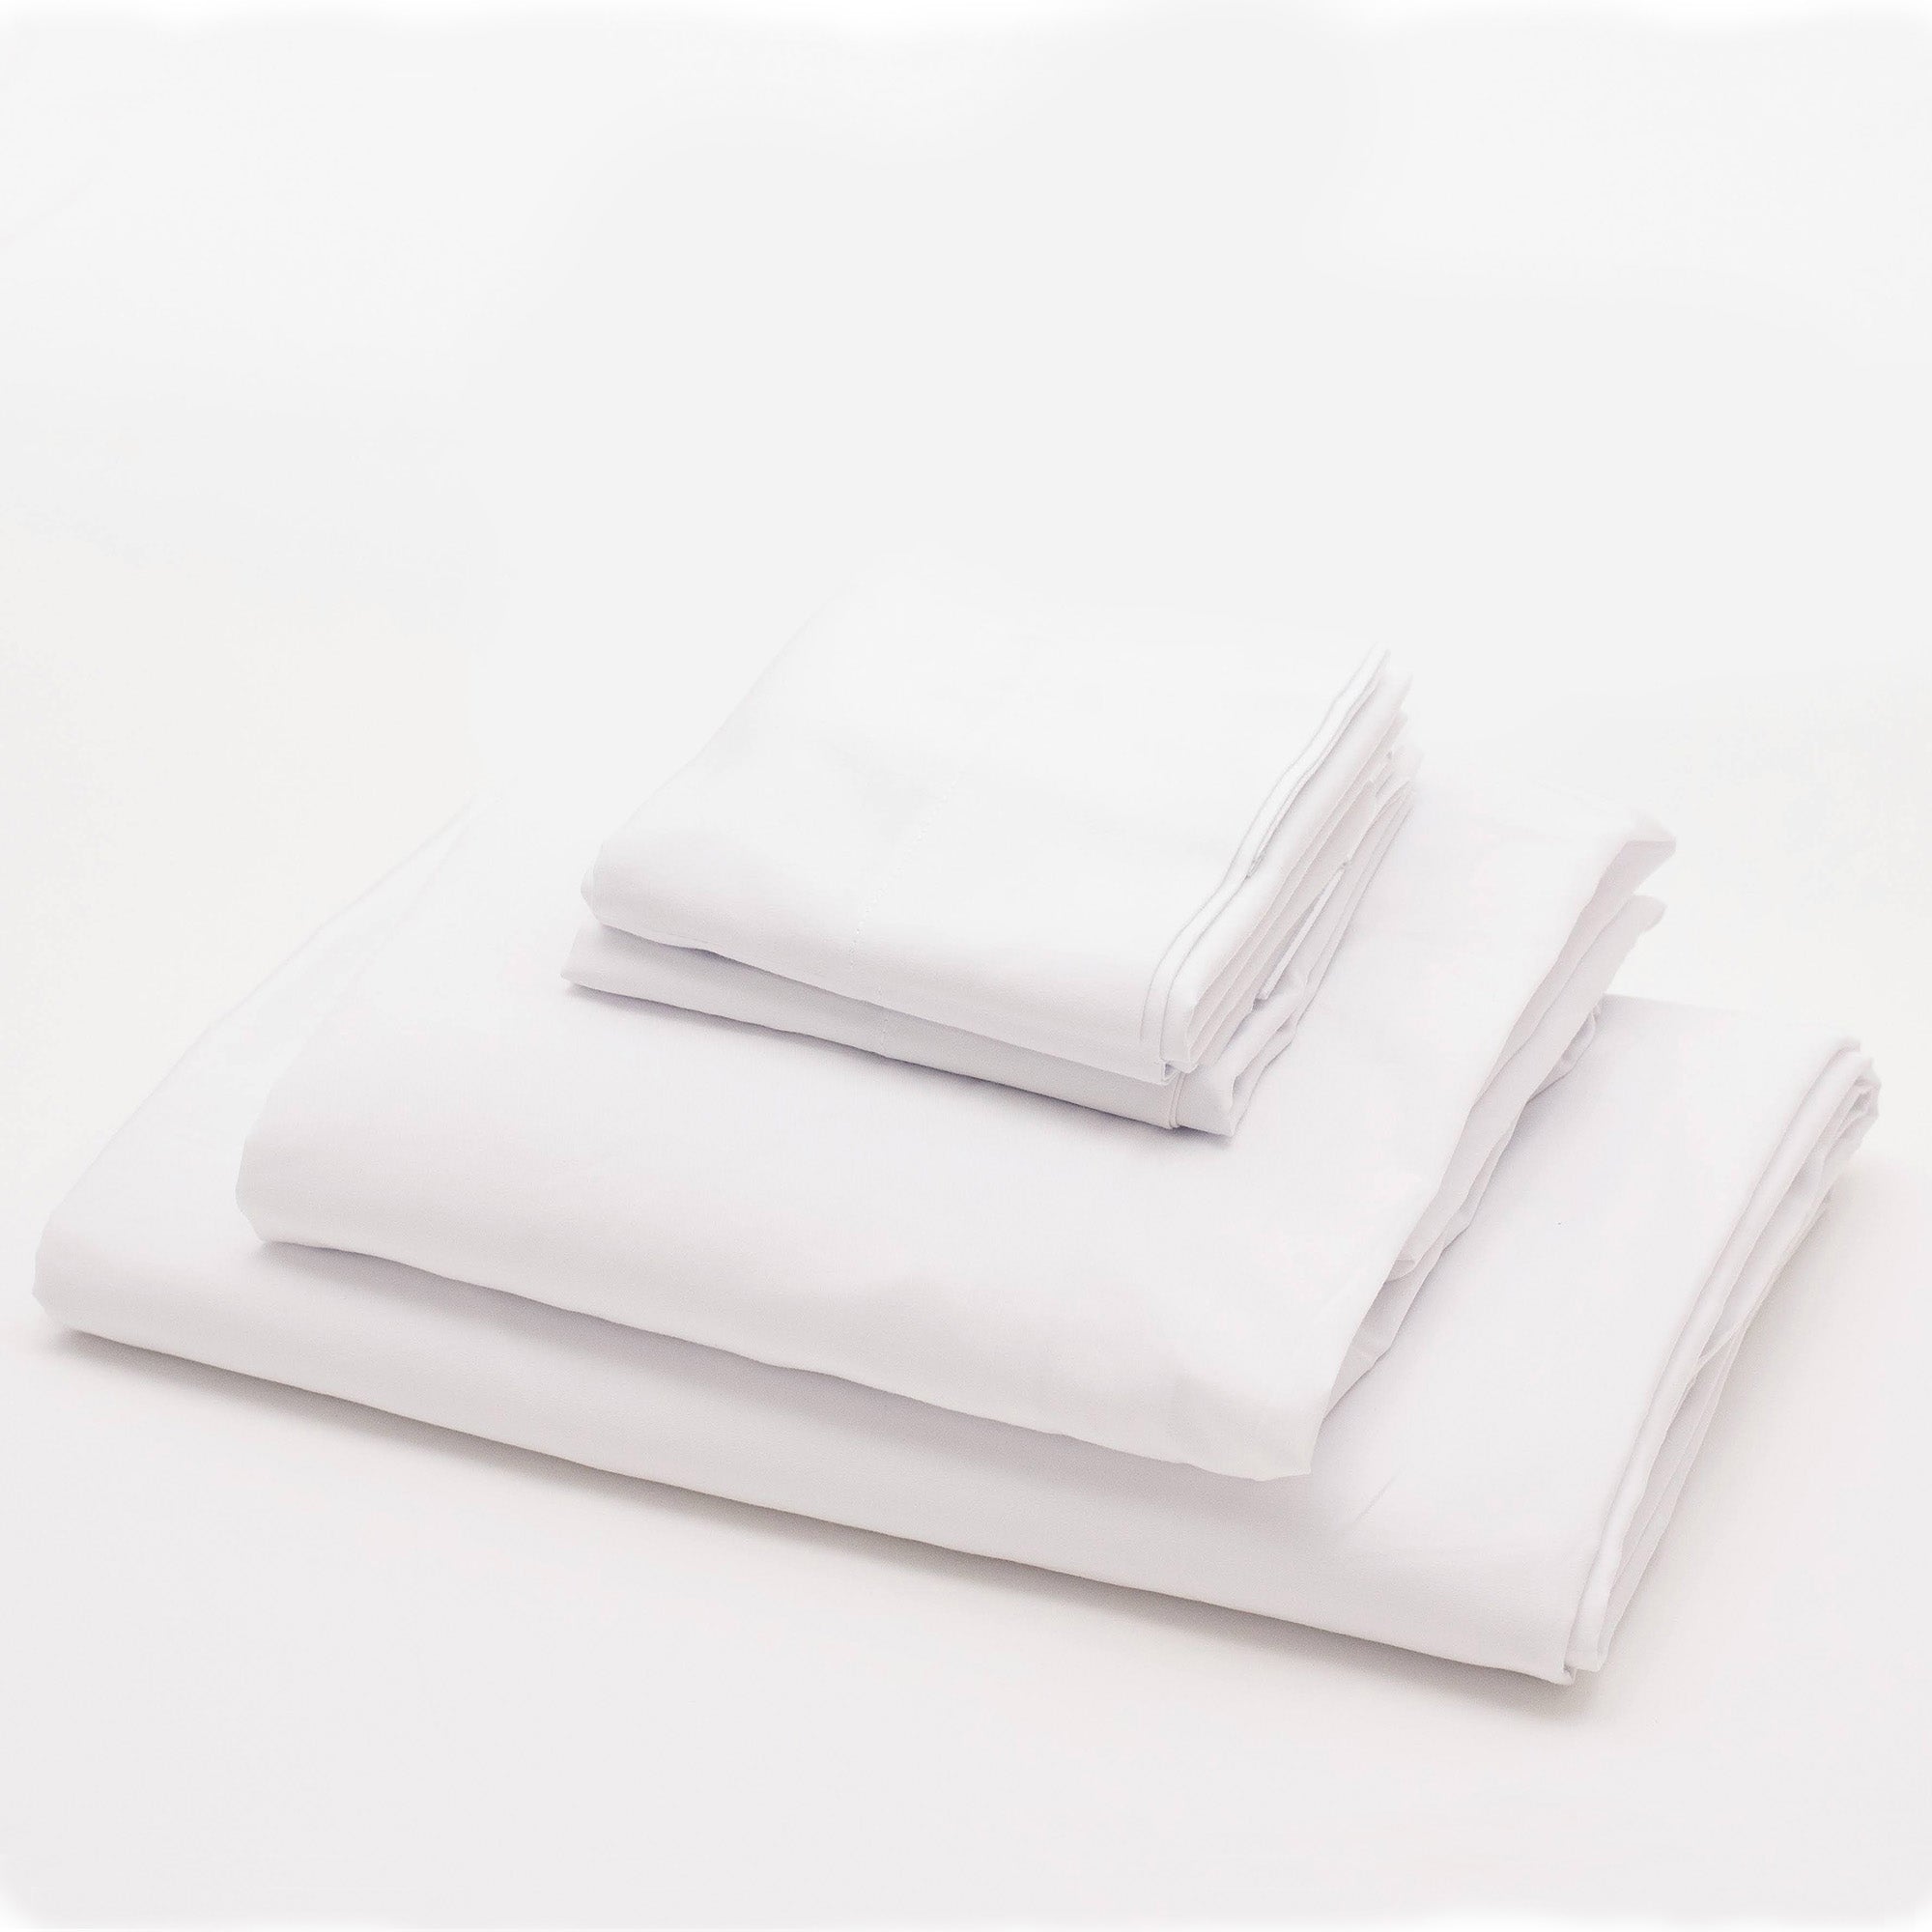 Cotton Sheets Made in USA, American Blanket Company - American Blanket  Company